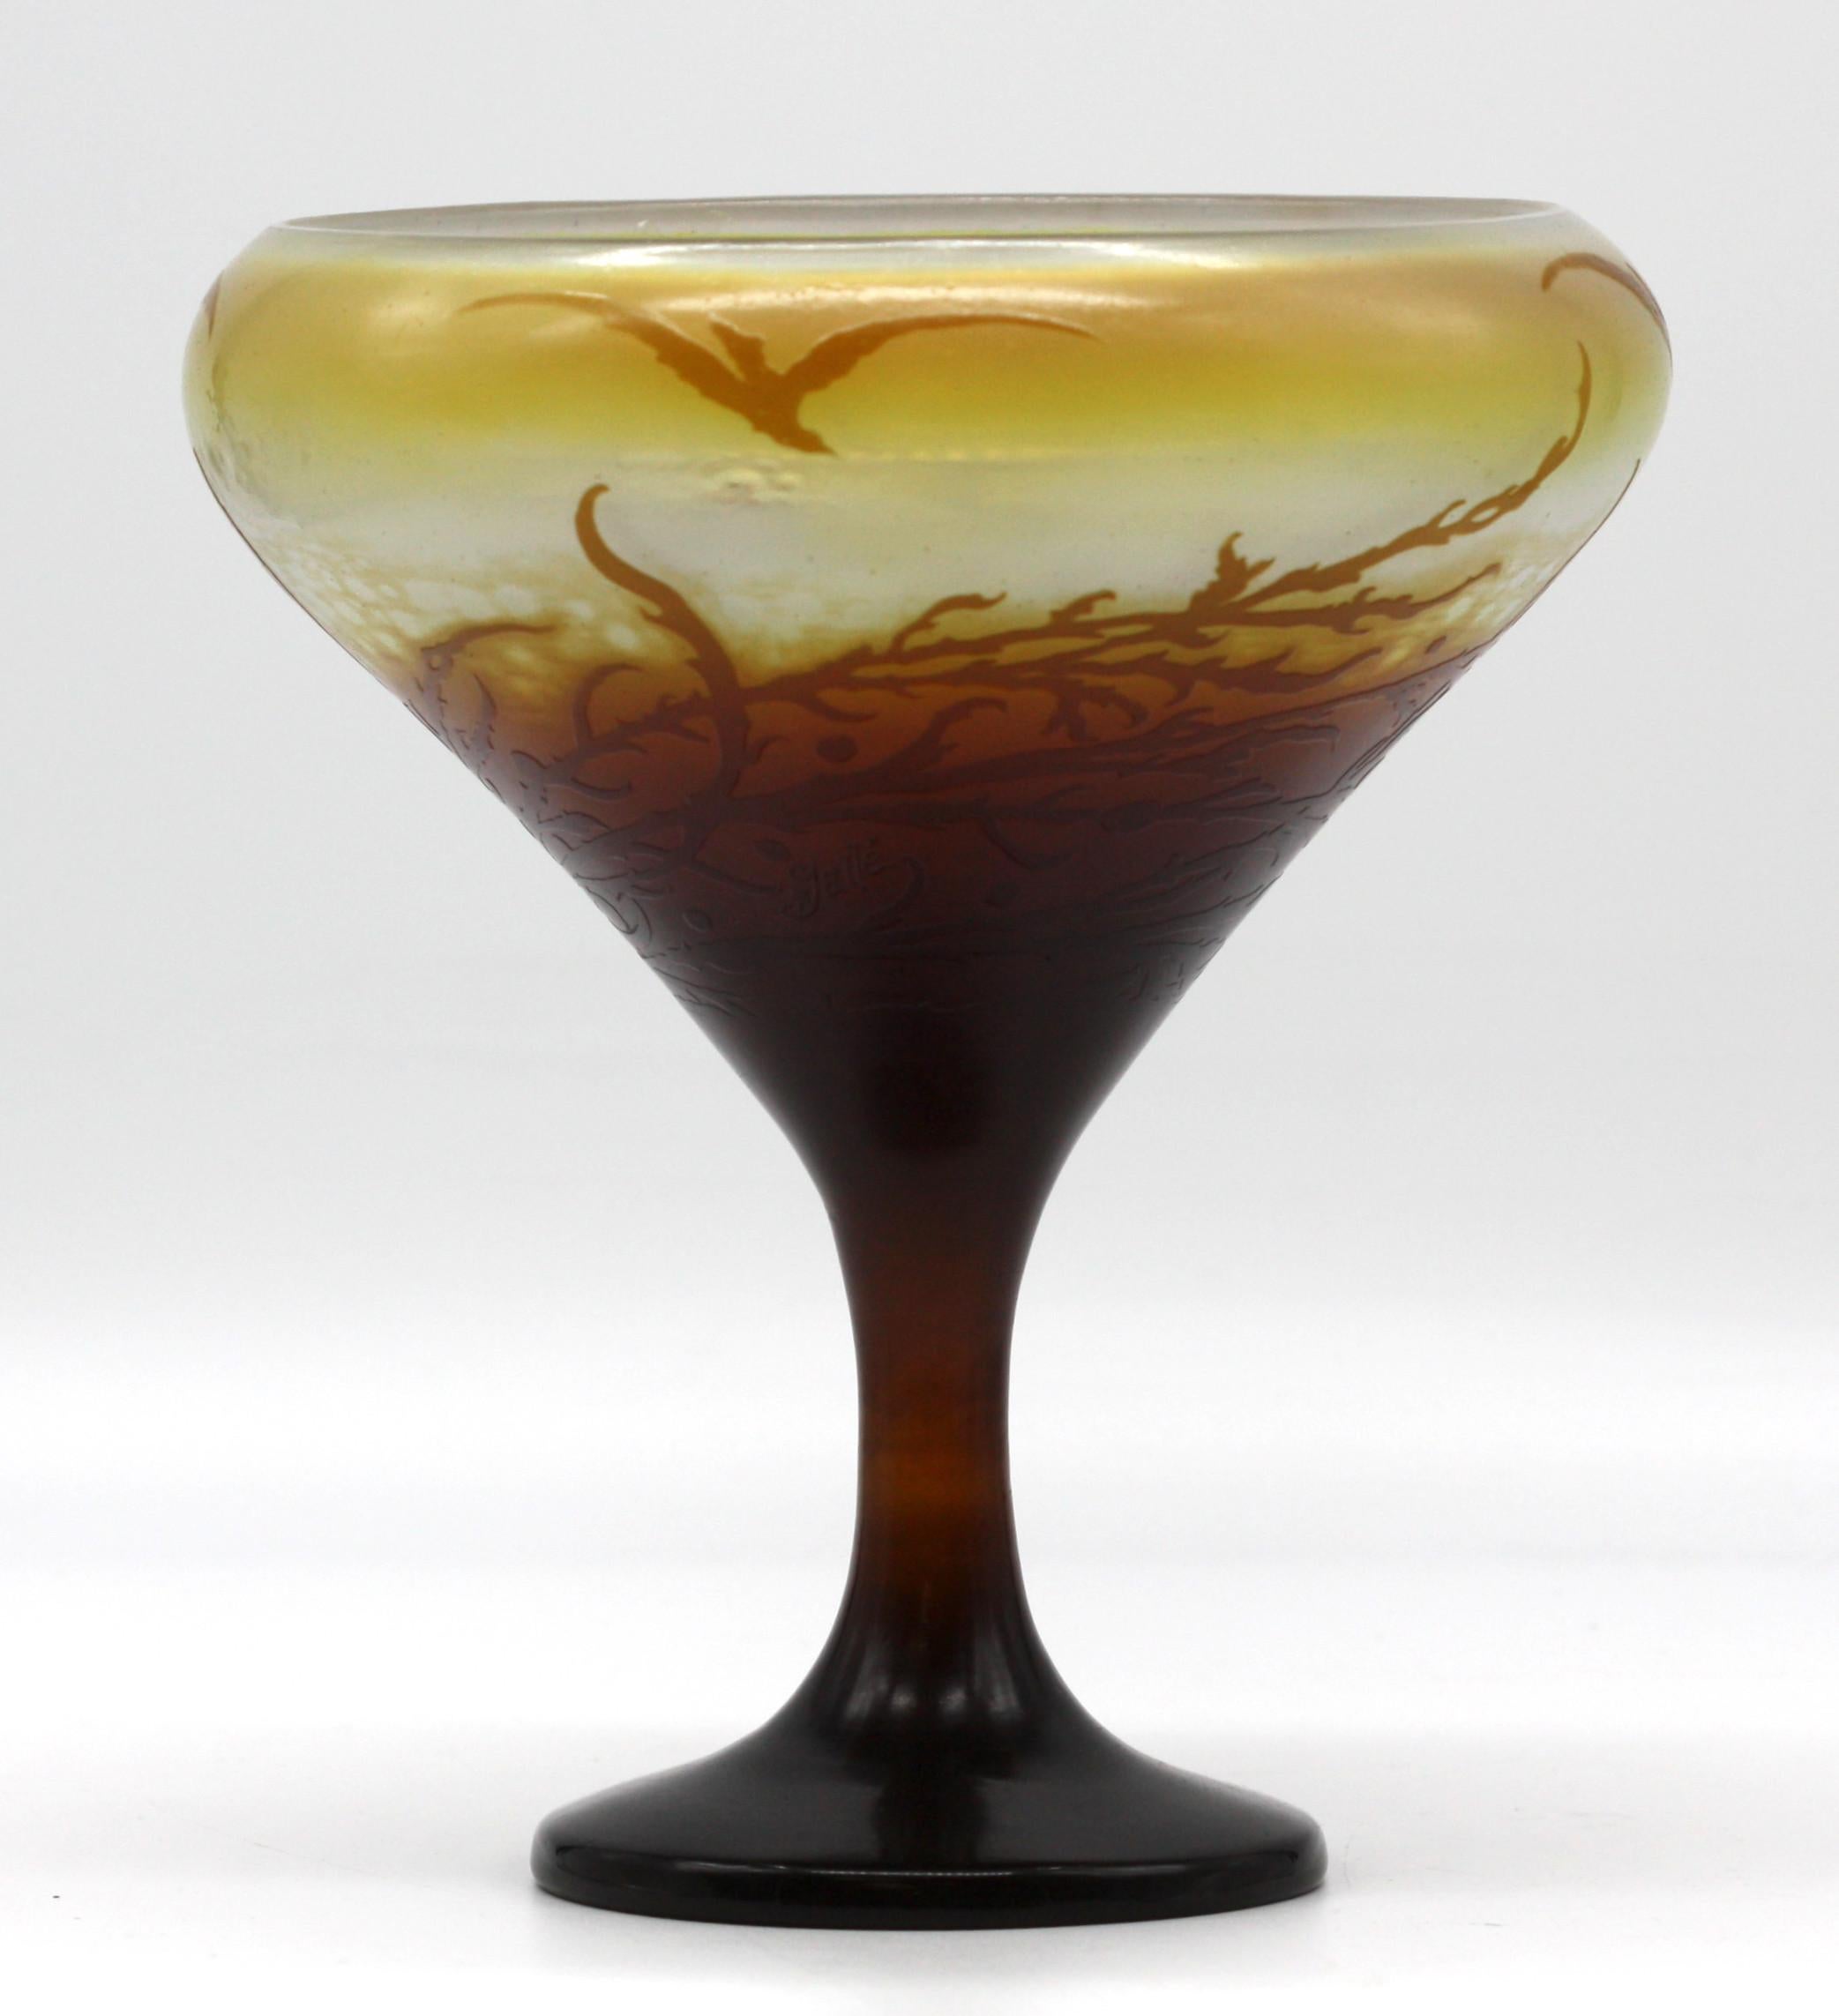 Fire-Polished Overlaid Cameo Glass Vase with Seagull Decoration In Good Condition For Sale In West Palm Beach, FL